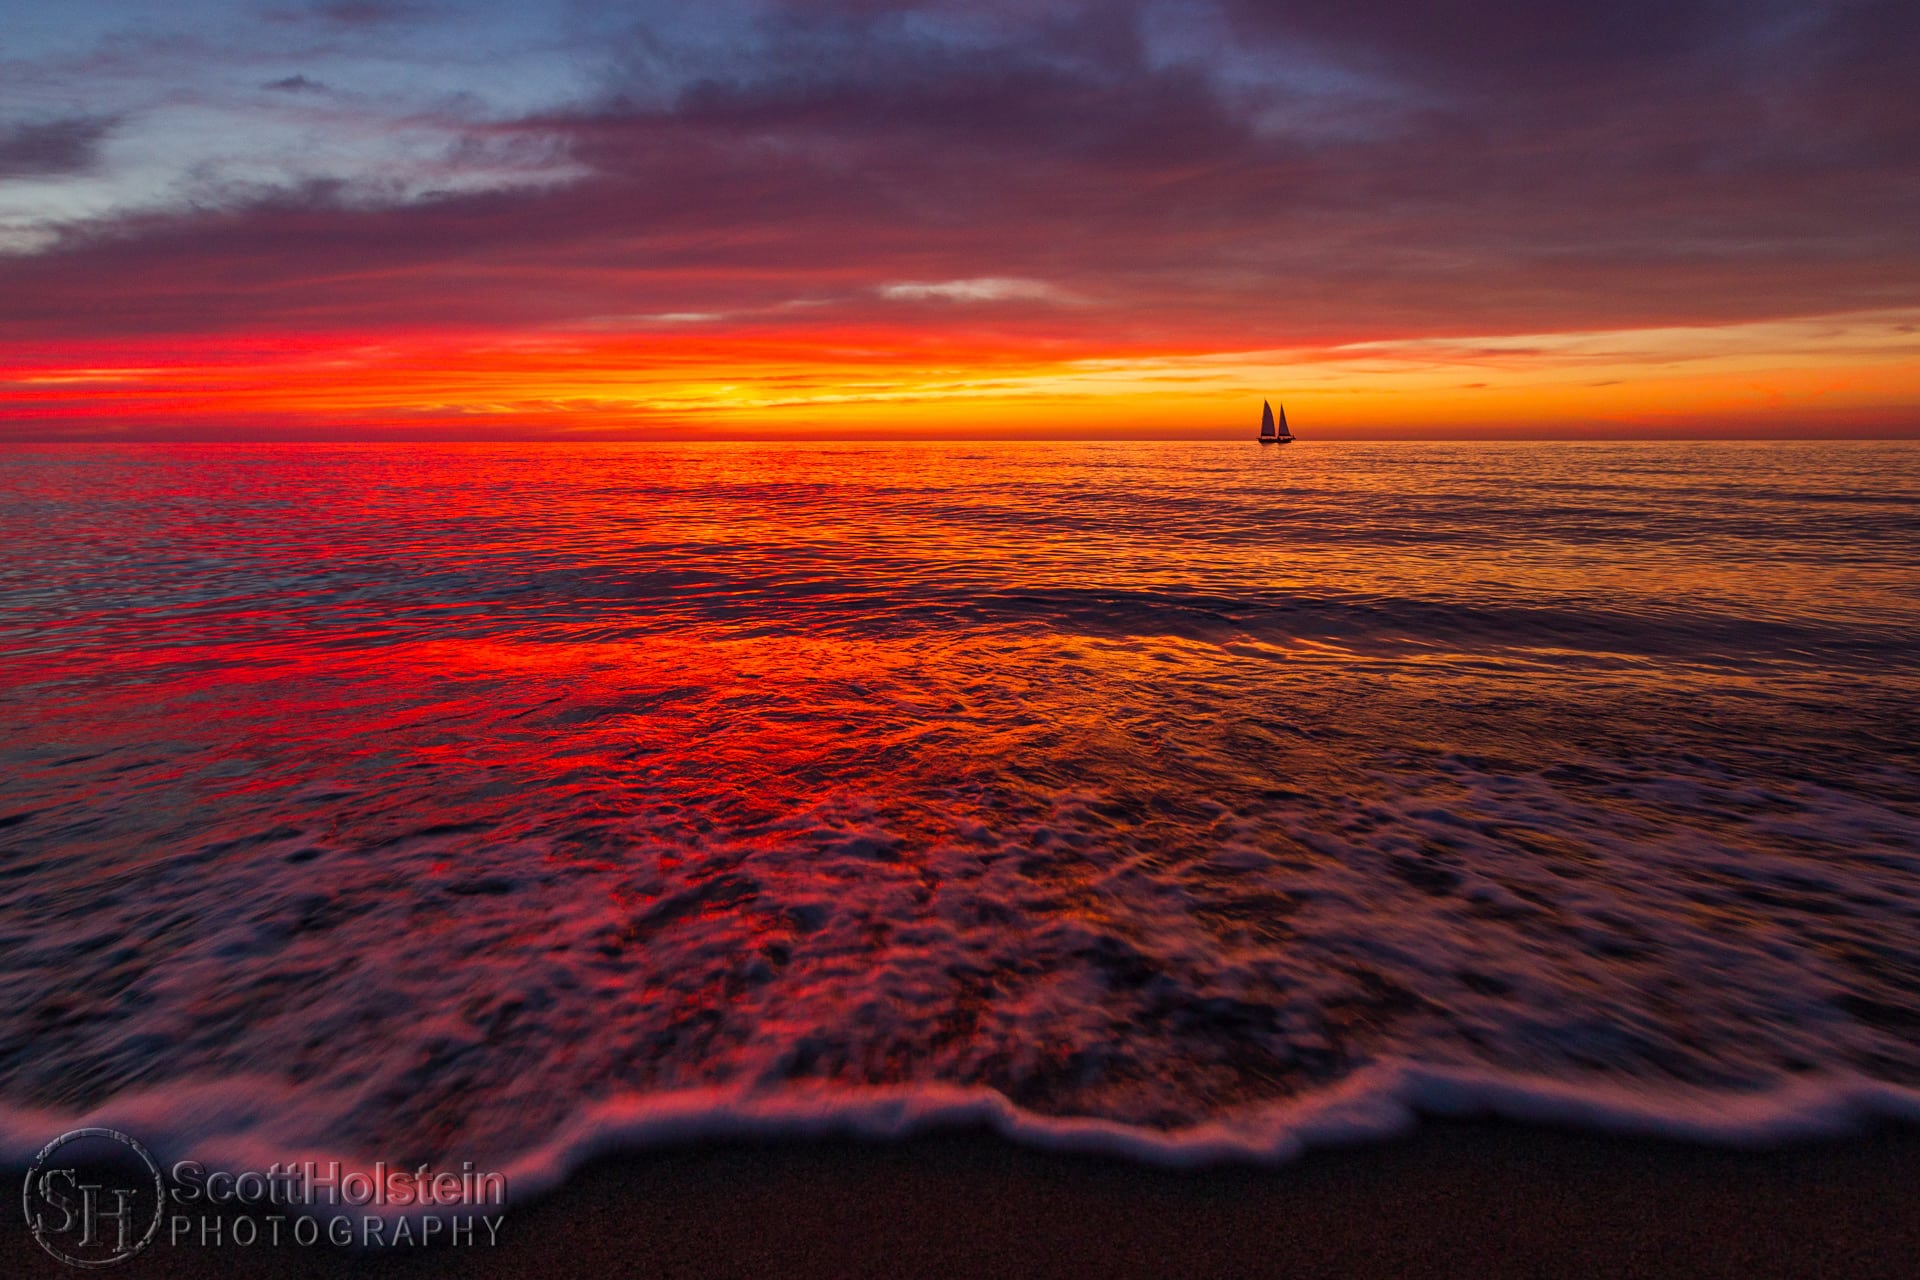 A sailboat sails during a vibrant sunset just off the beach in Venice, Florida.